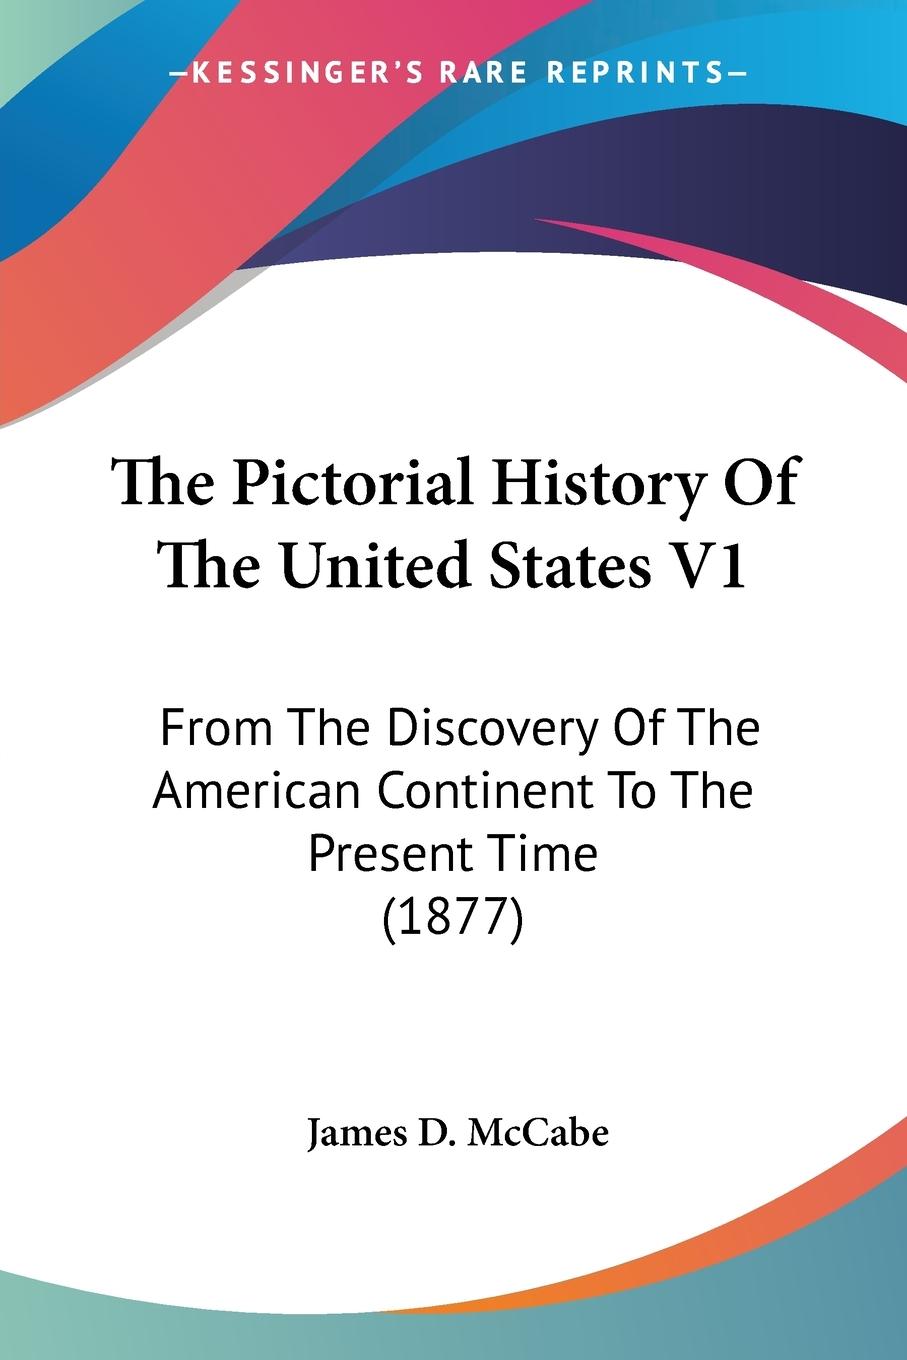 The Pictorial History Of The United States V1 - Mccabe, James D.